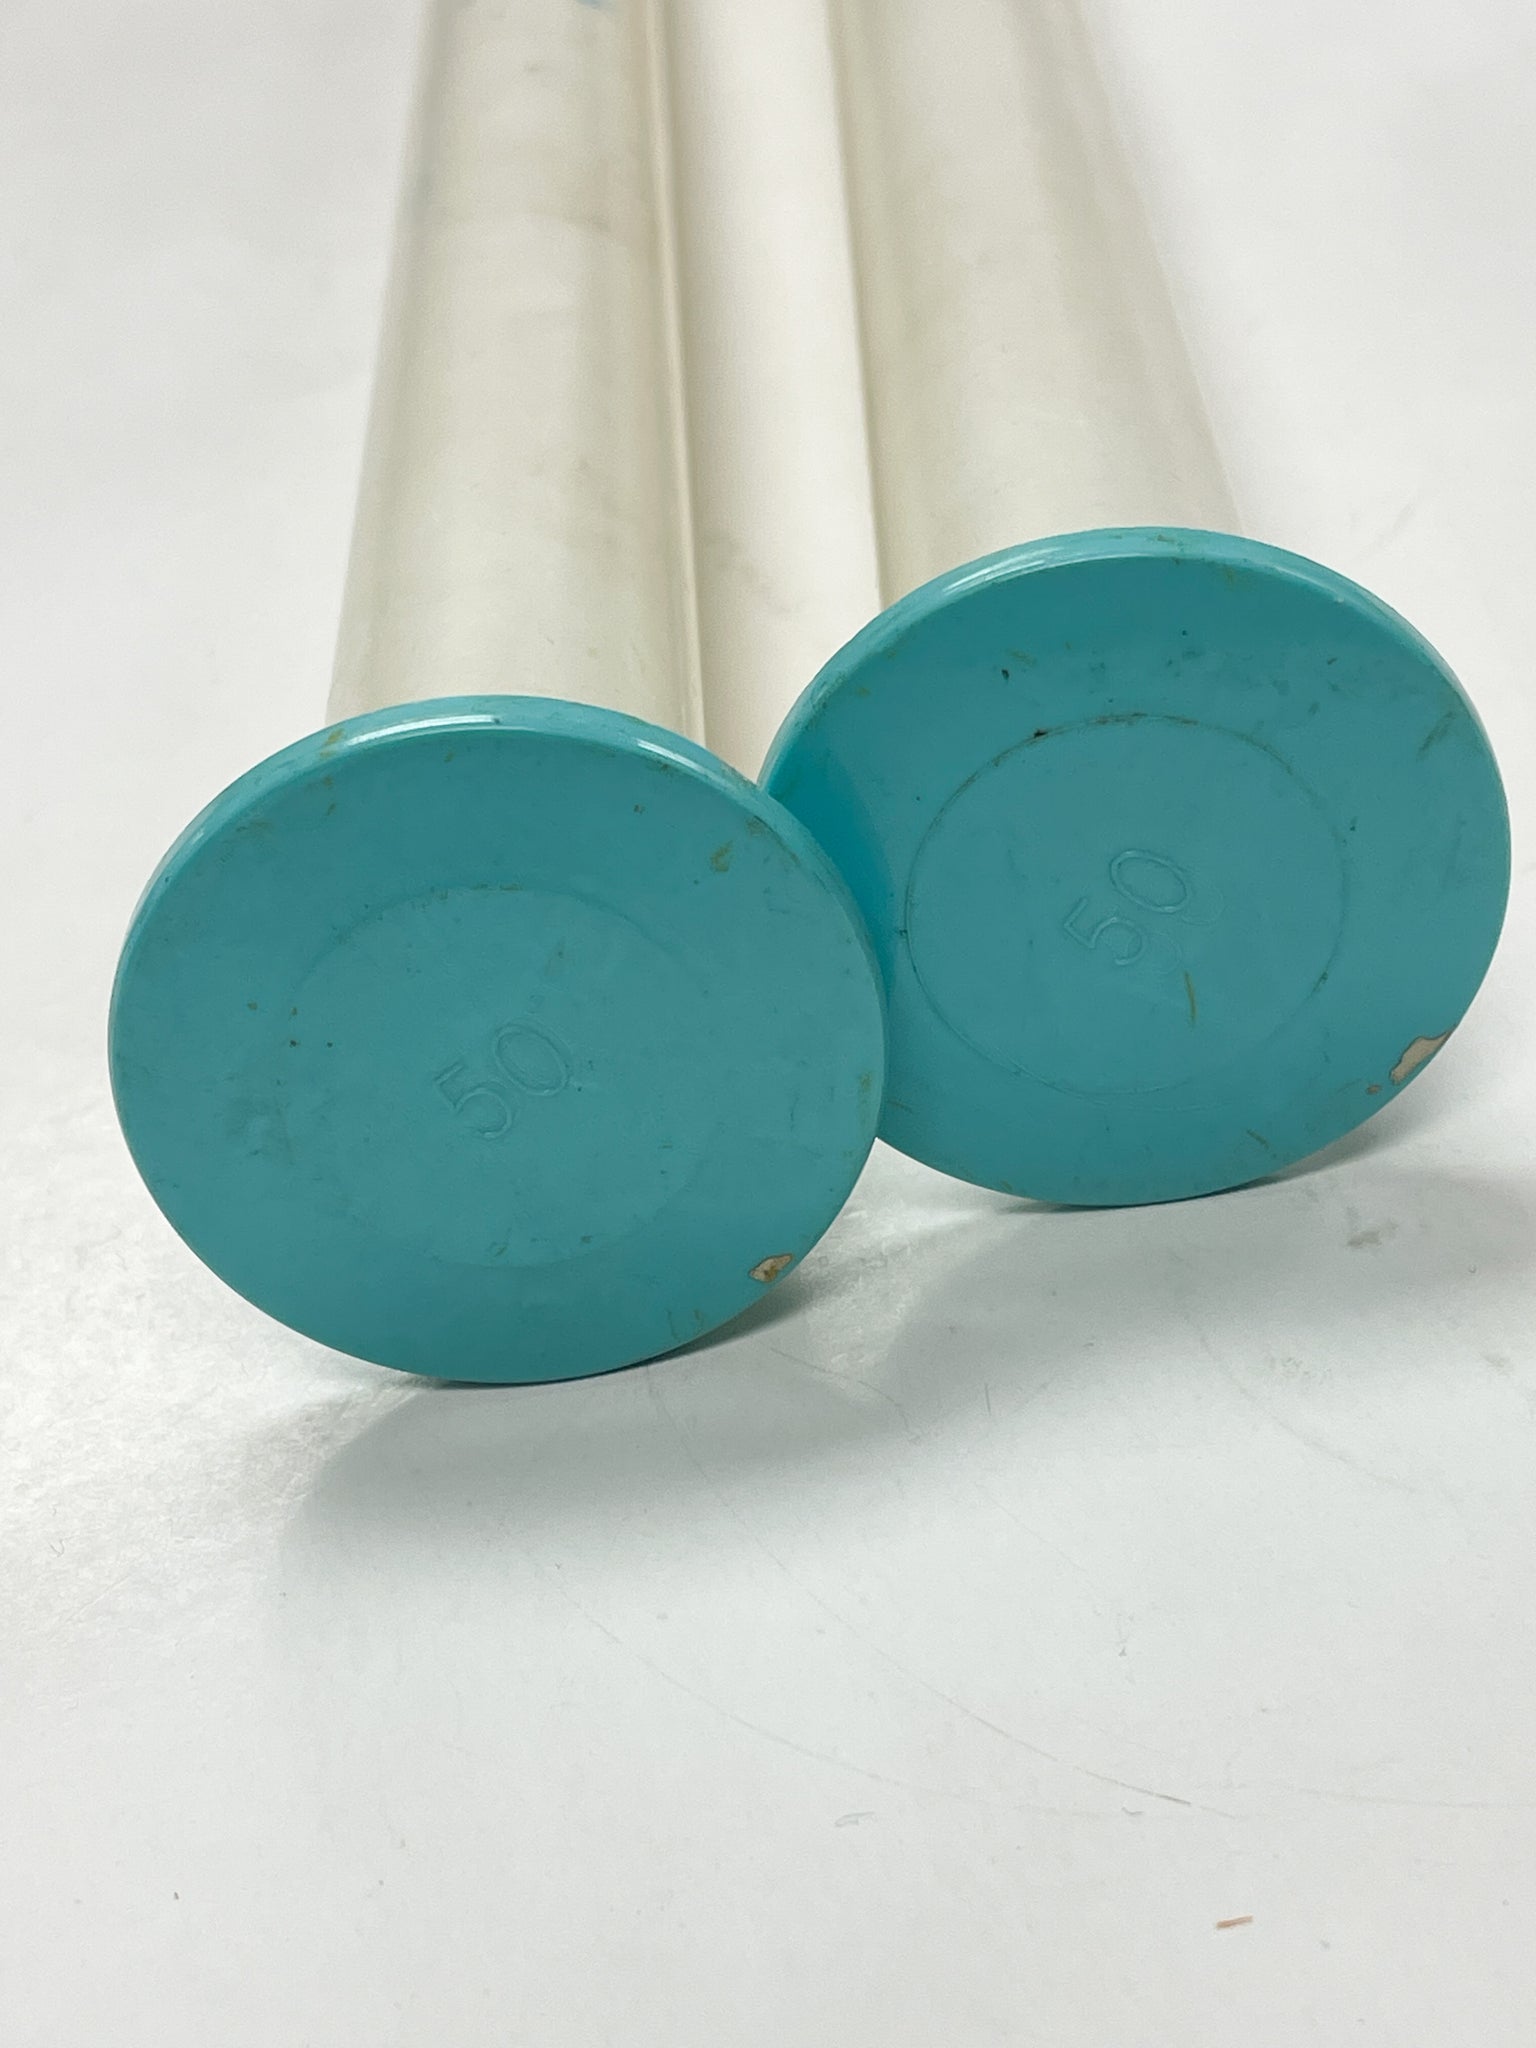 Knitting Needle Plastic 50 mm - Off White with Turquoise